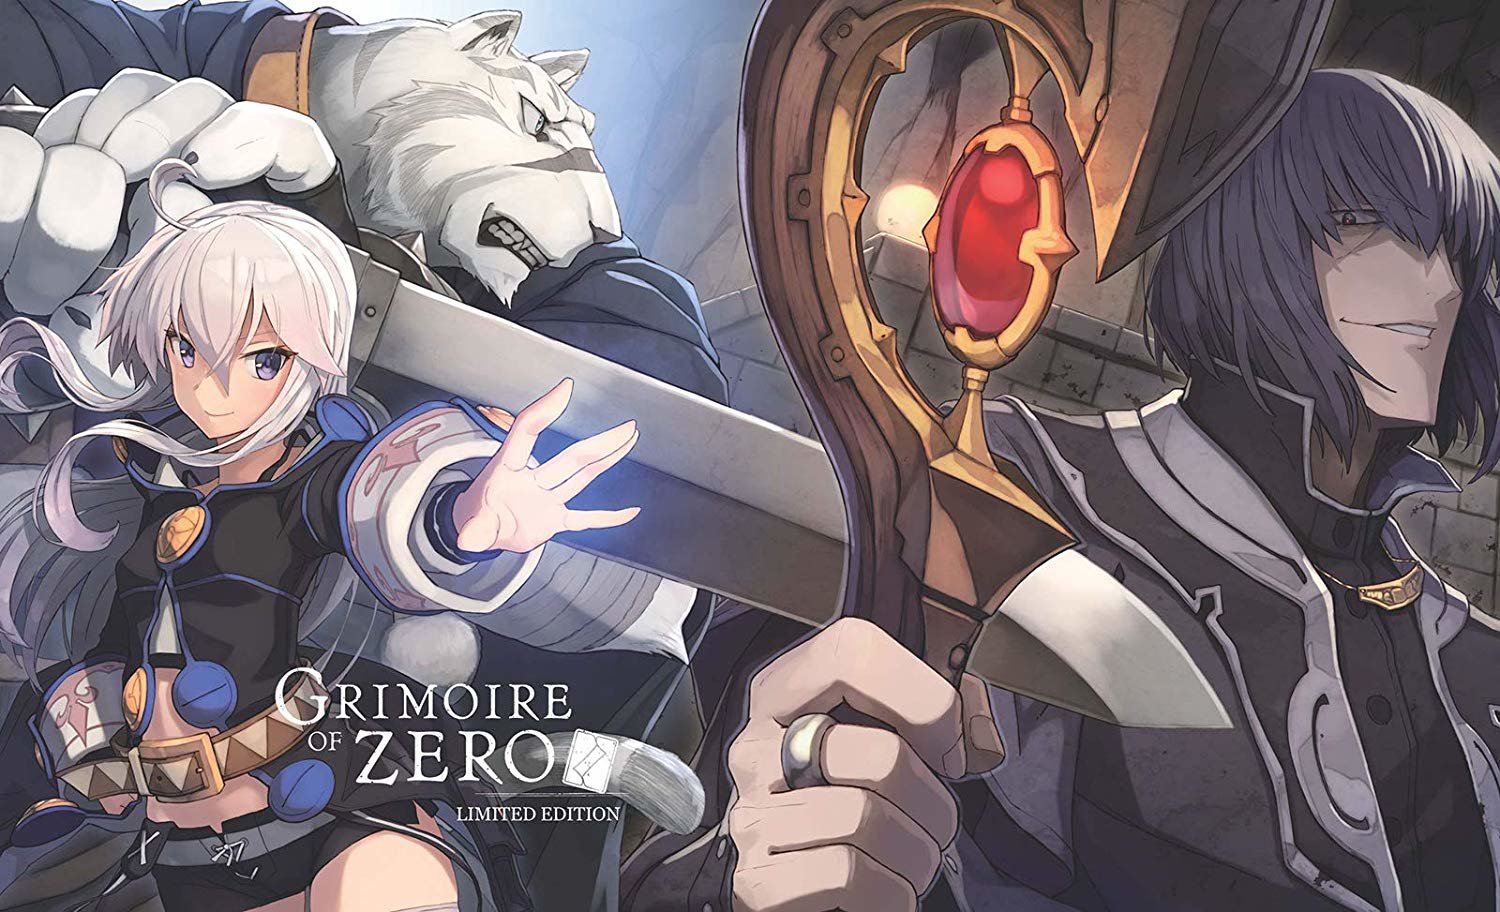 Streamer grimoire Grimoire with